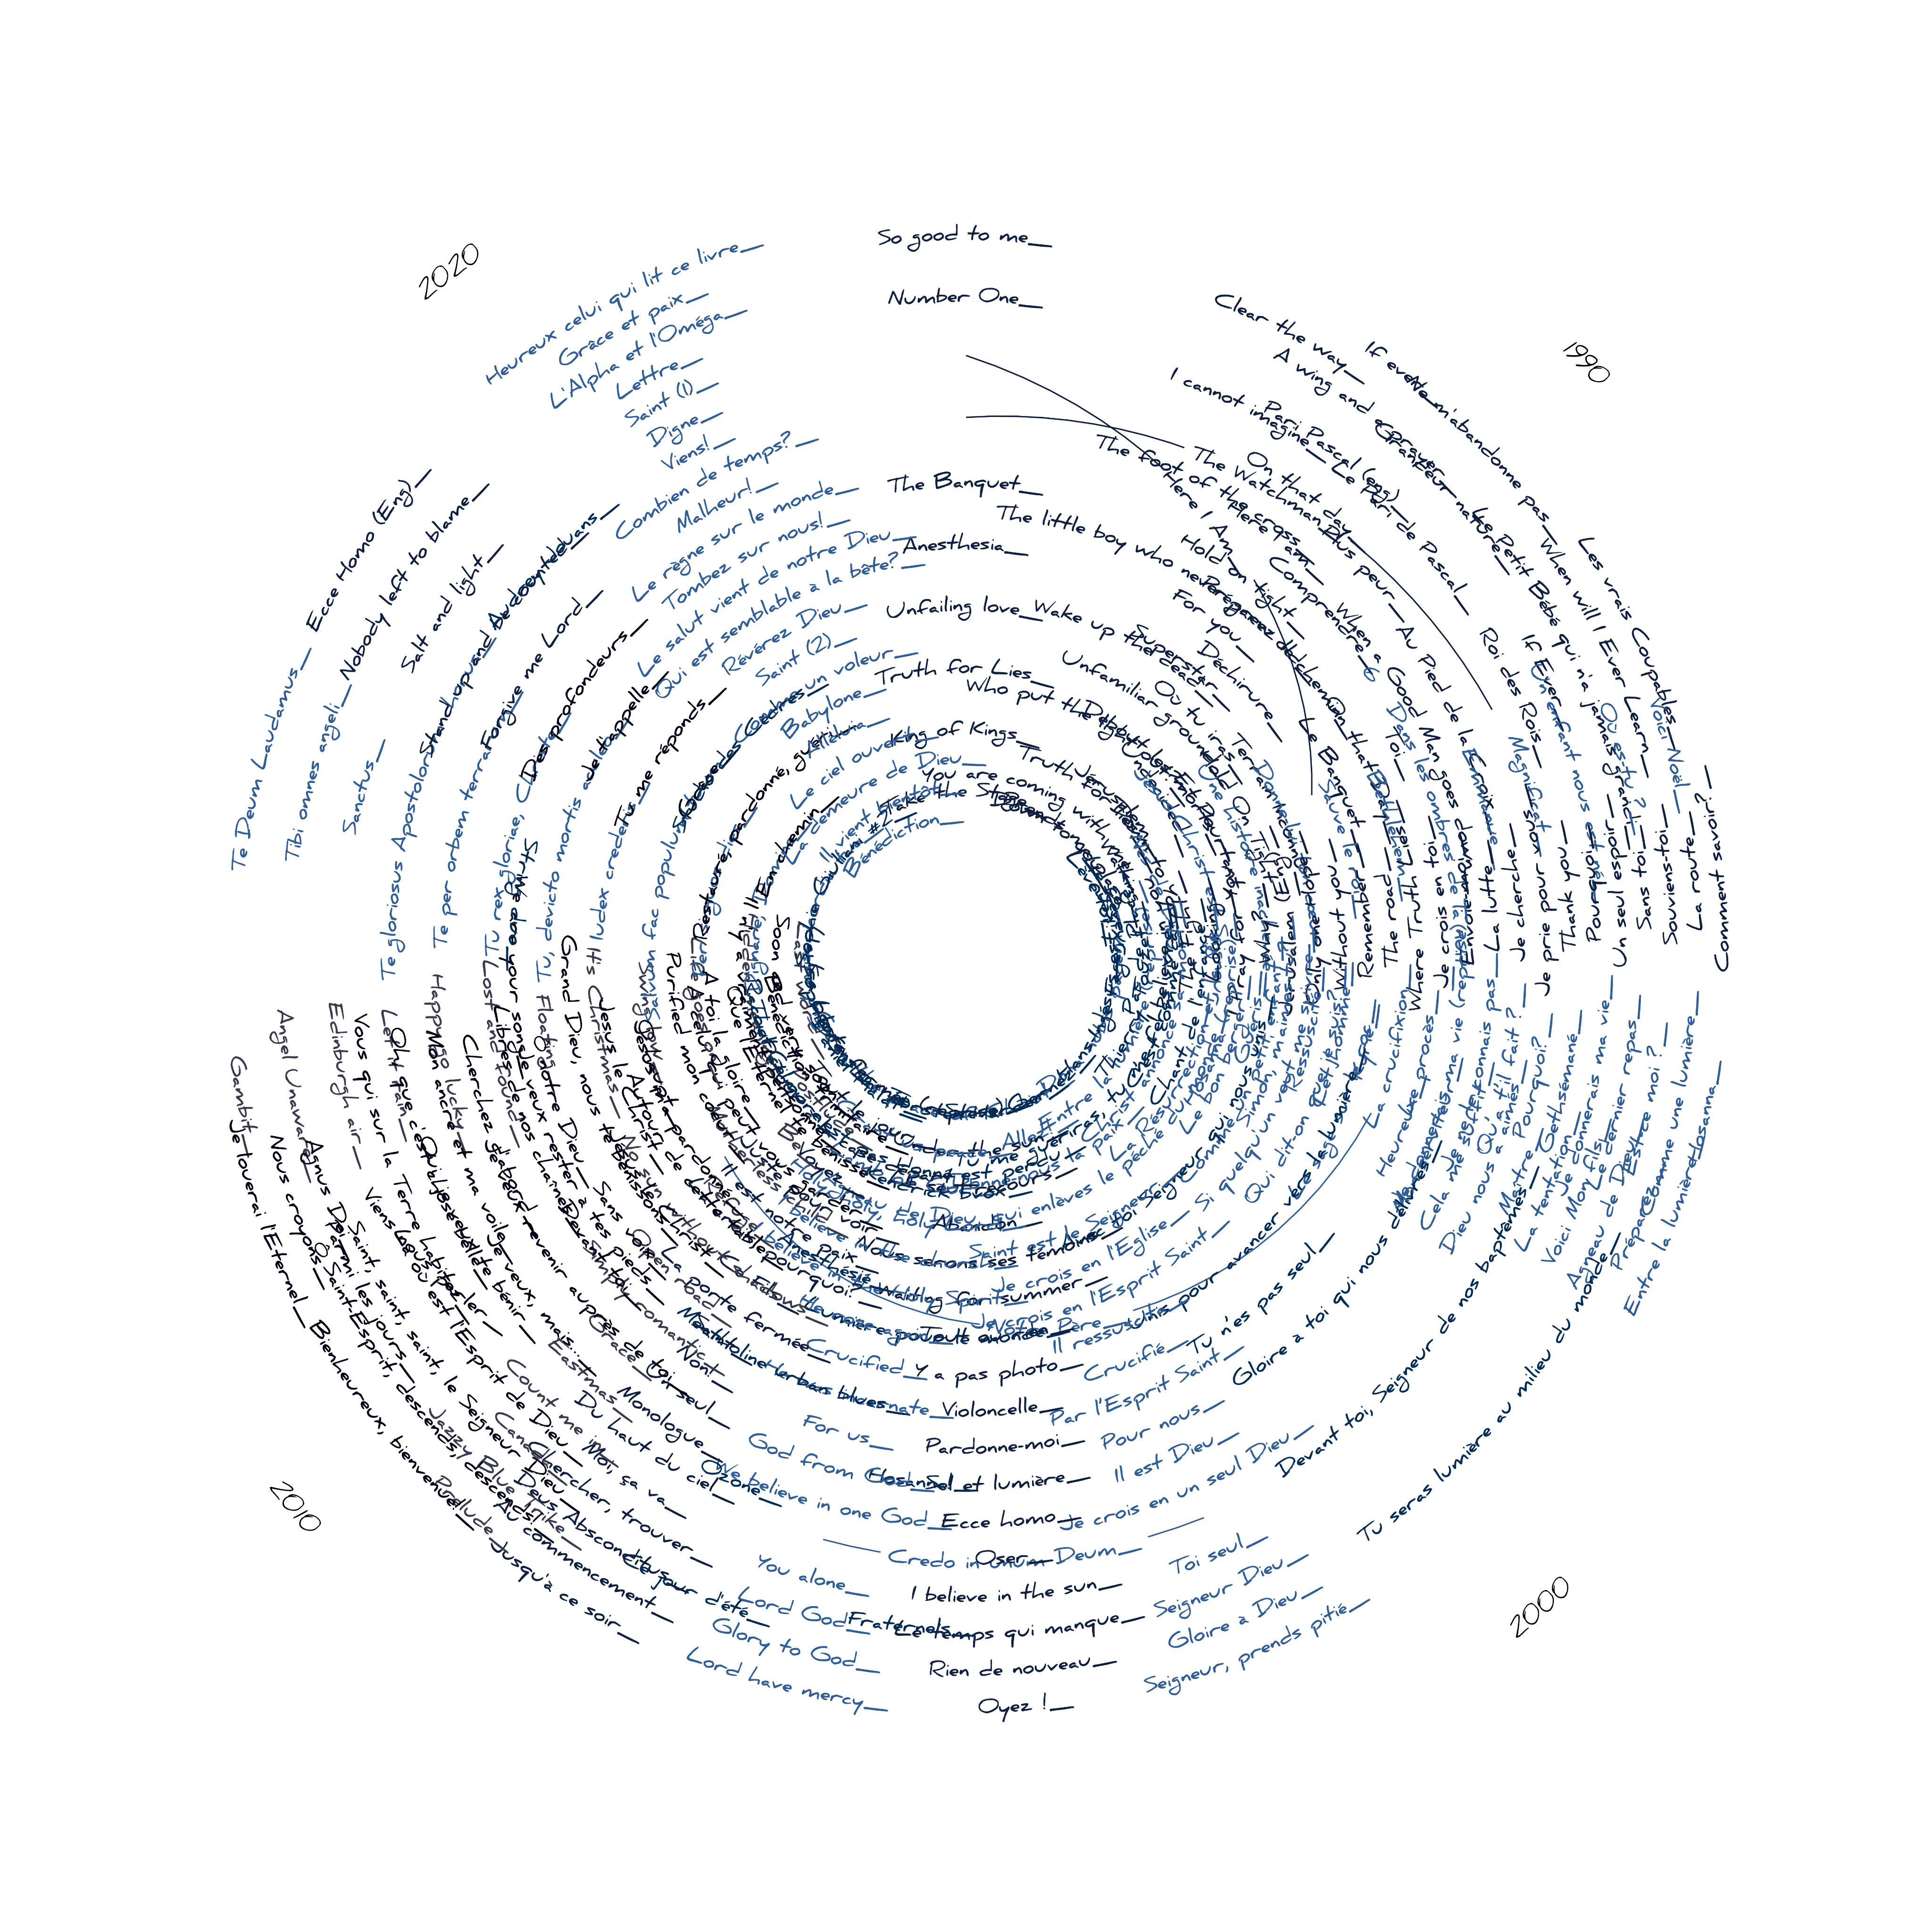 Record: A dataviz celebrating the songs written by John Featherstone in which handwritten song titles go round in a circle to look like a well used CD or vinyl